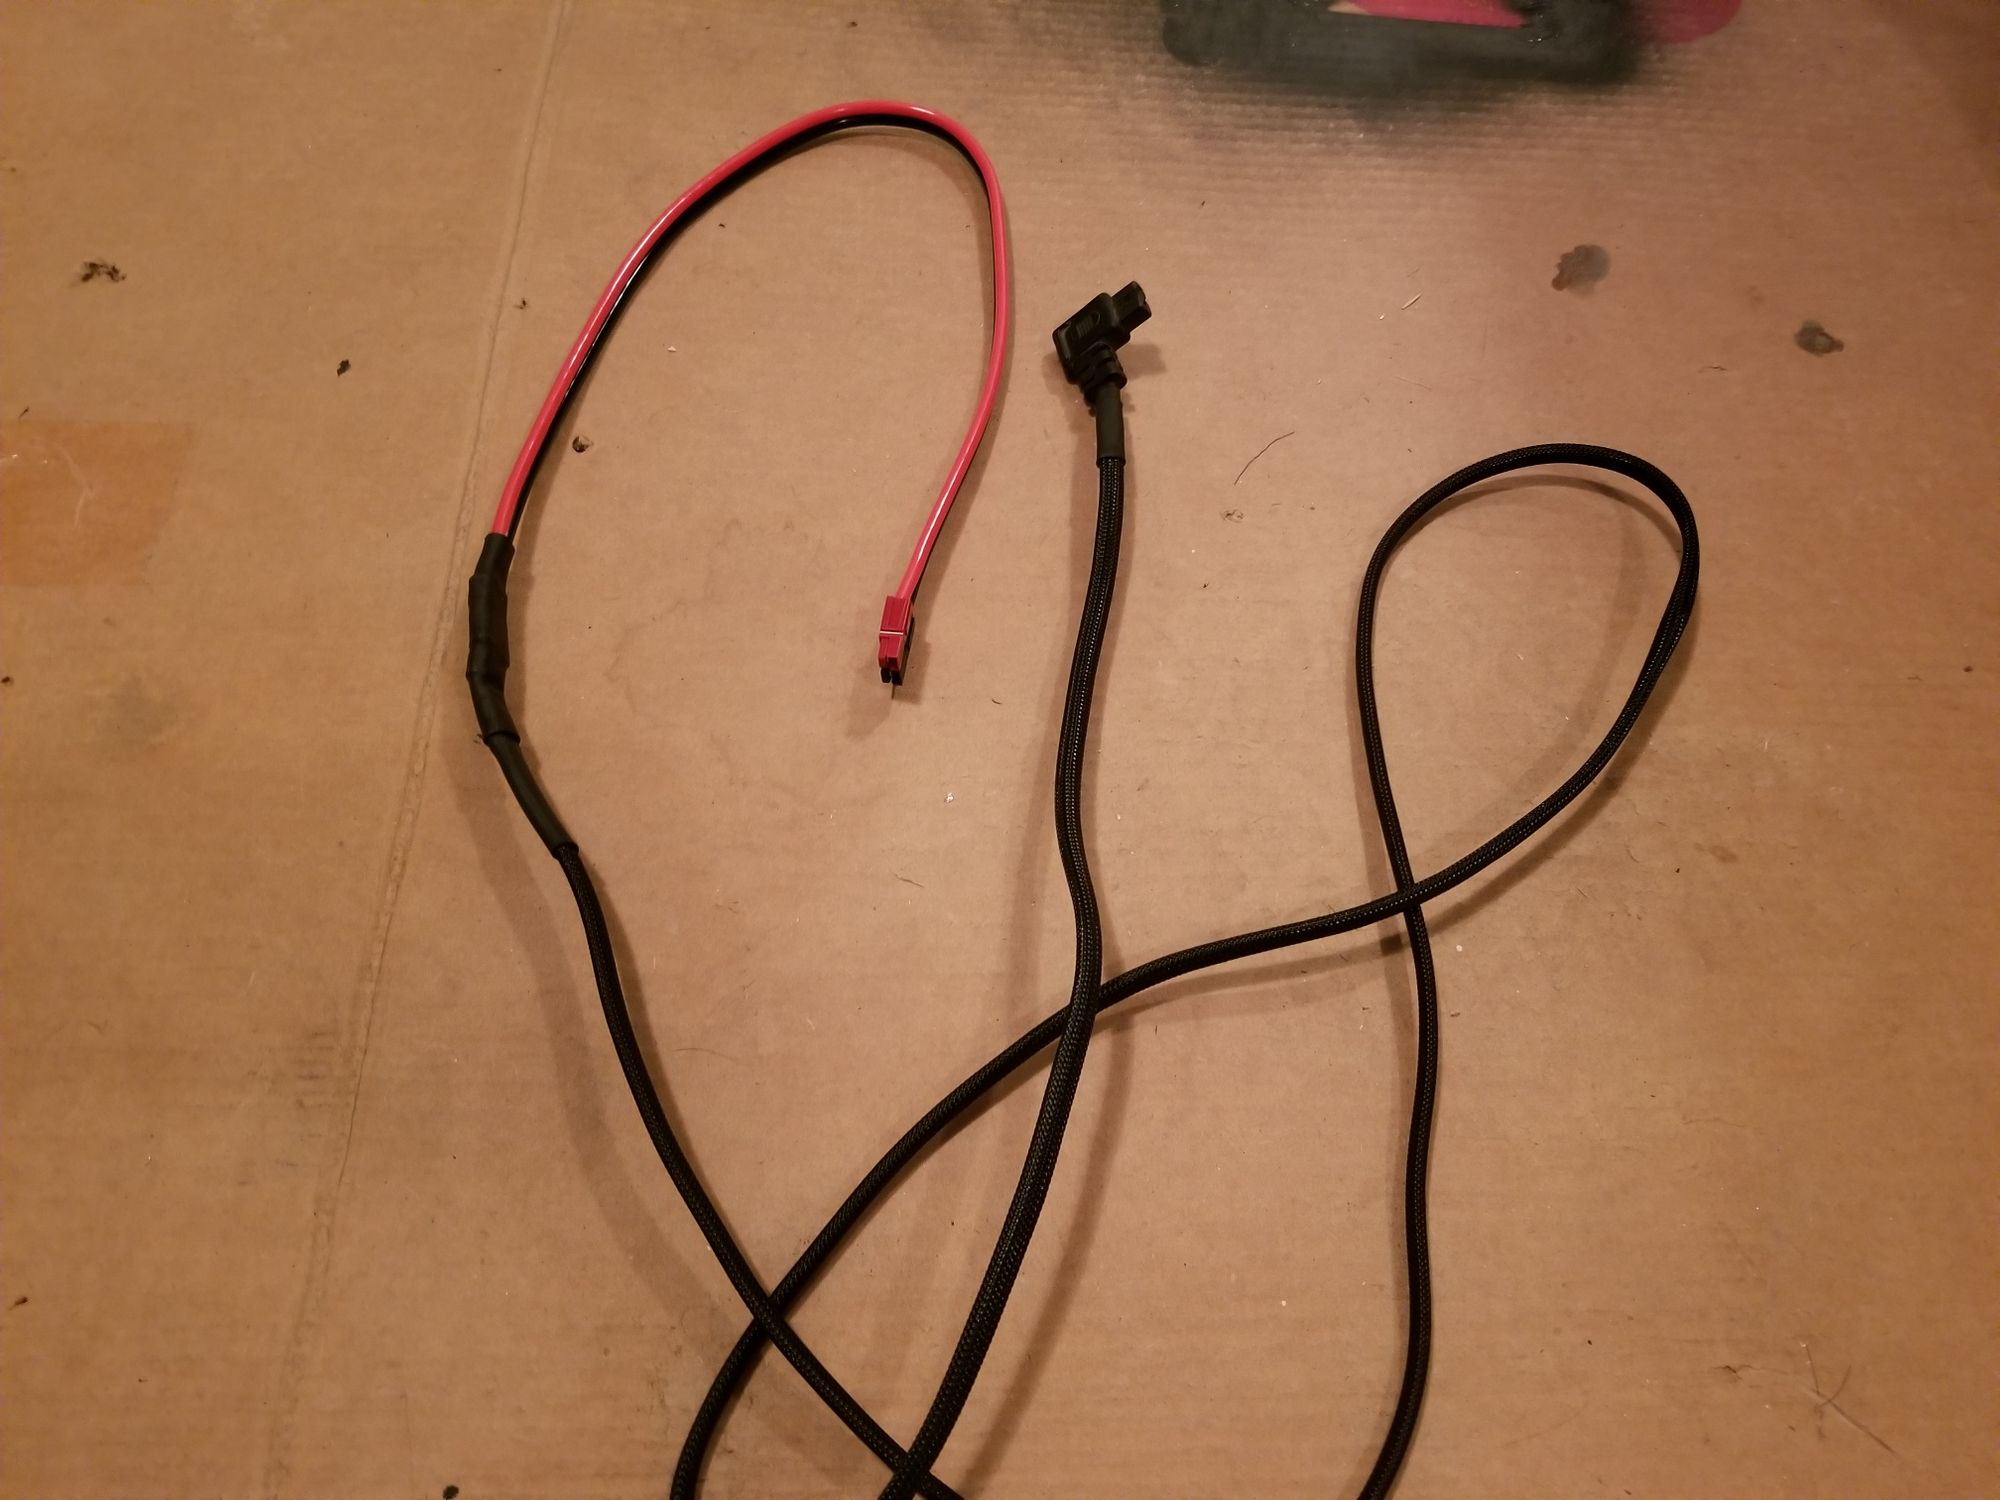 Mod: Re-wiring for Anderson connections